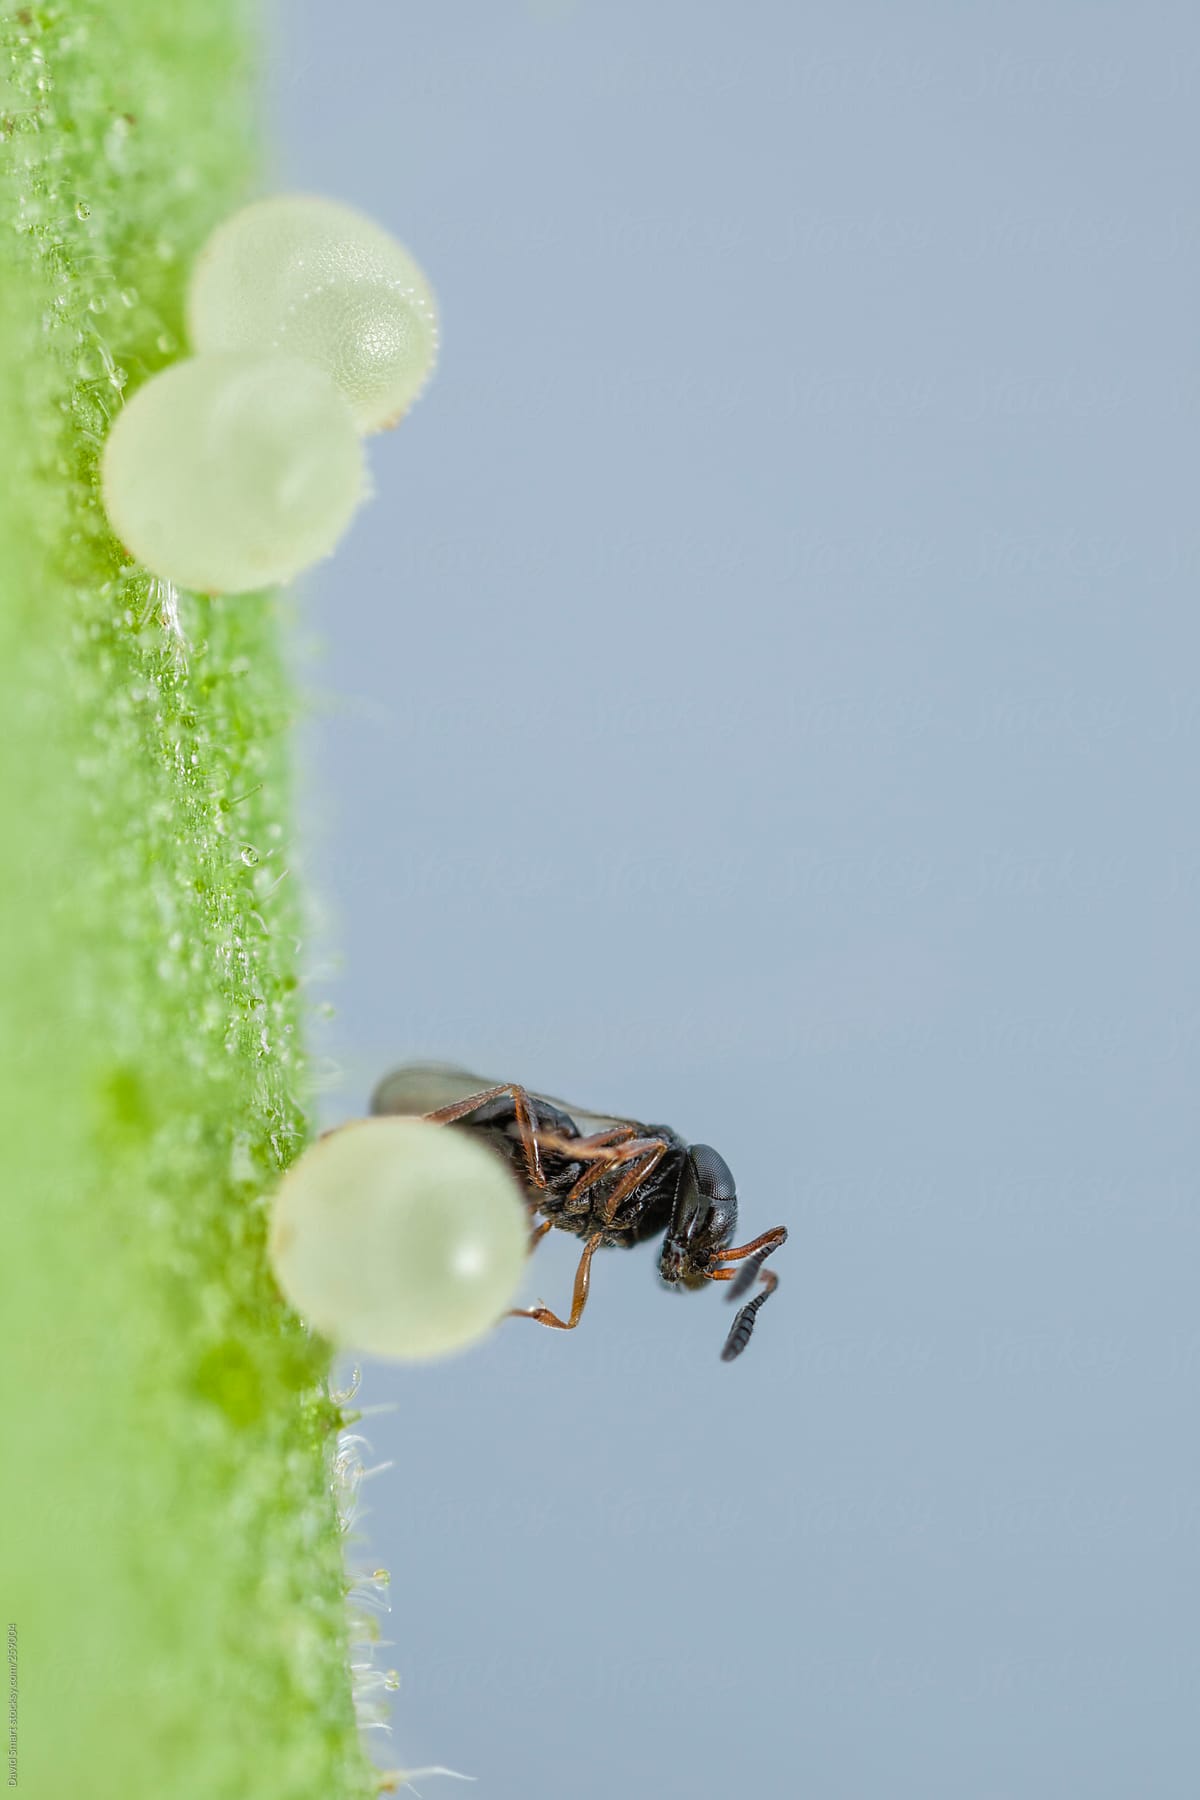 Parasitic wasp depositing her egg in a stink bug egg